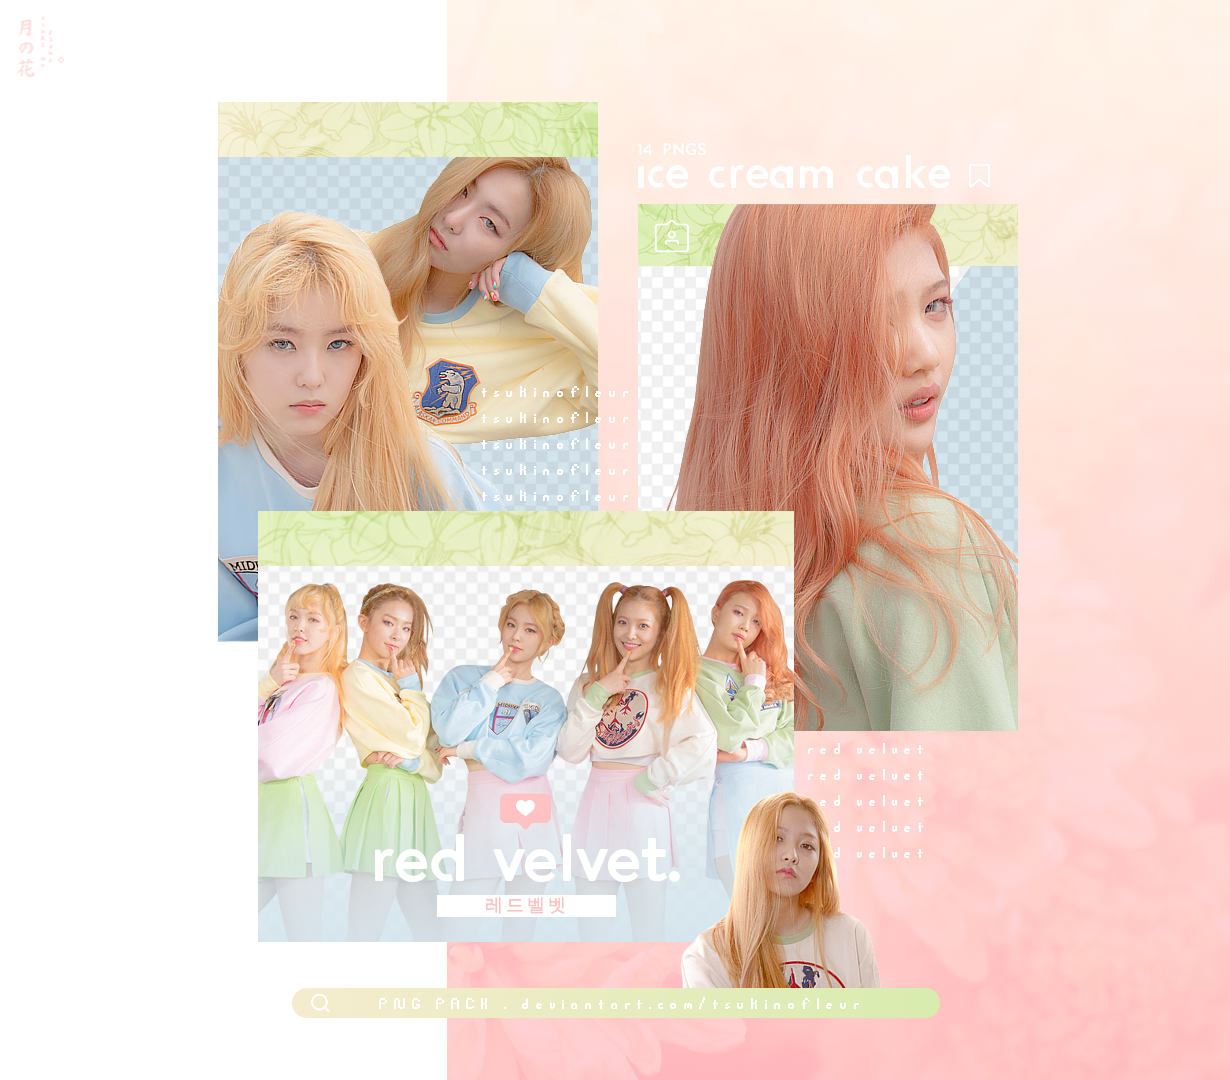 Red Velvet] Russian Roulette - PNG PACK by TsukinoFleur on DeviantArt